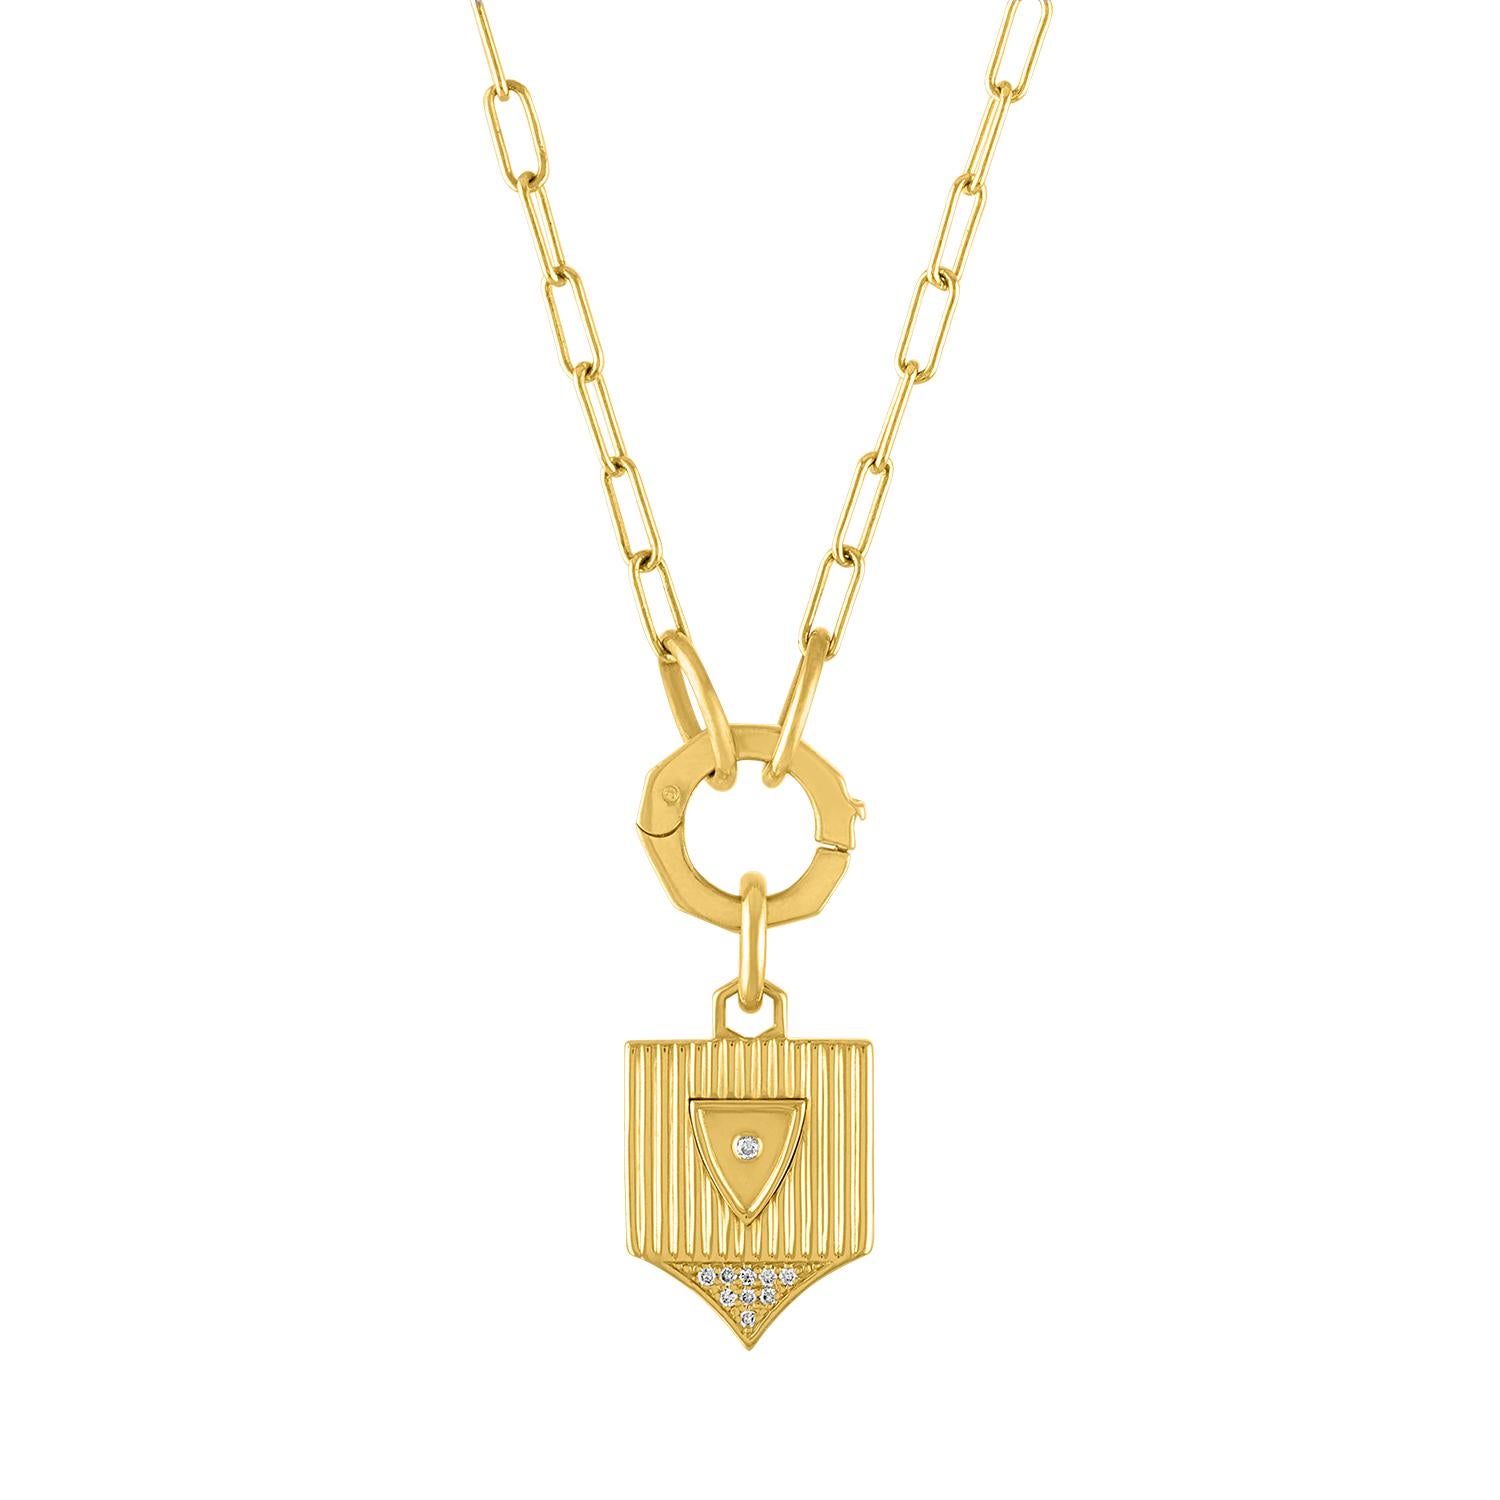 A rectangular link chain, finished with large jump rings, provides the setting for our pendants to be layered.  The chain holds a chunky, hexagon charm holder to mix and match with our shields.  The look of these components together is bold and